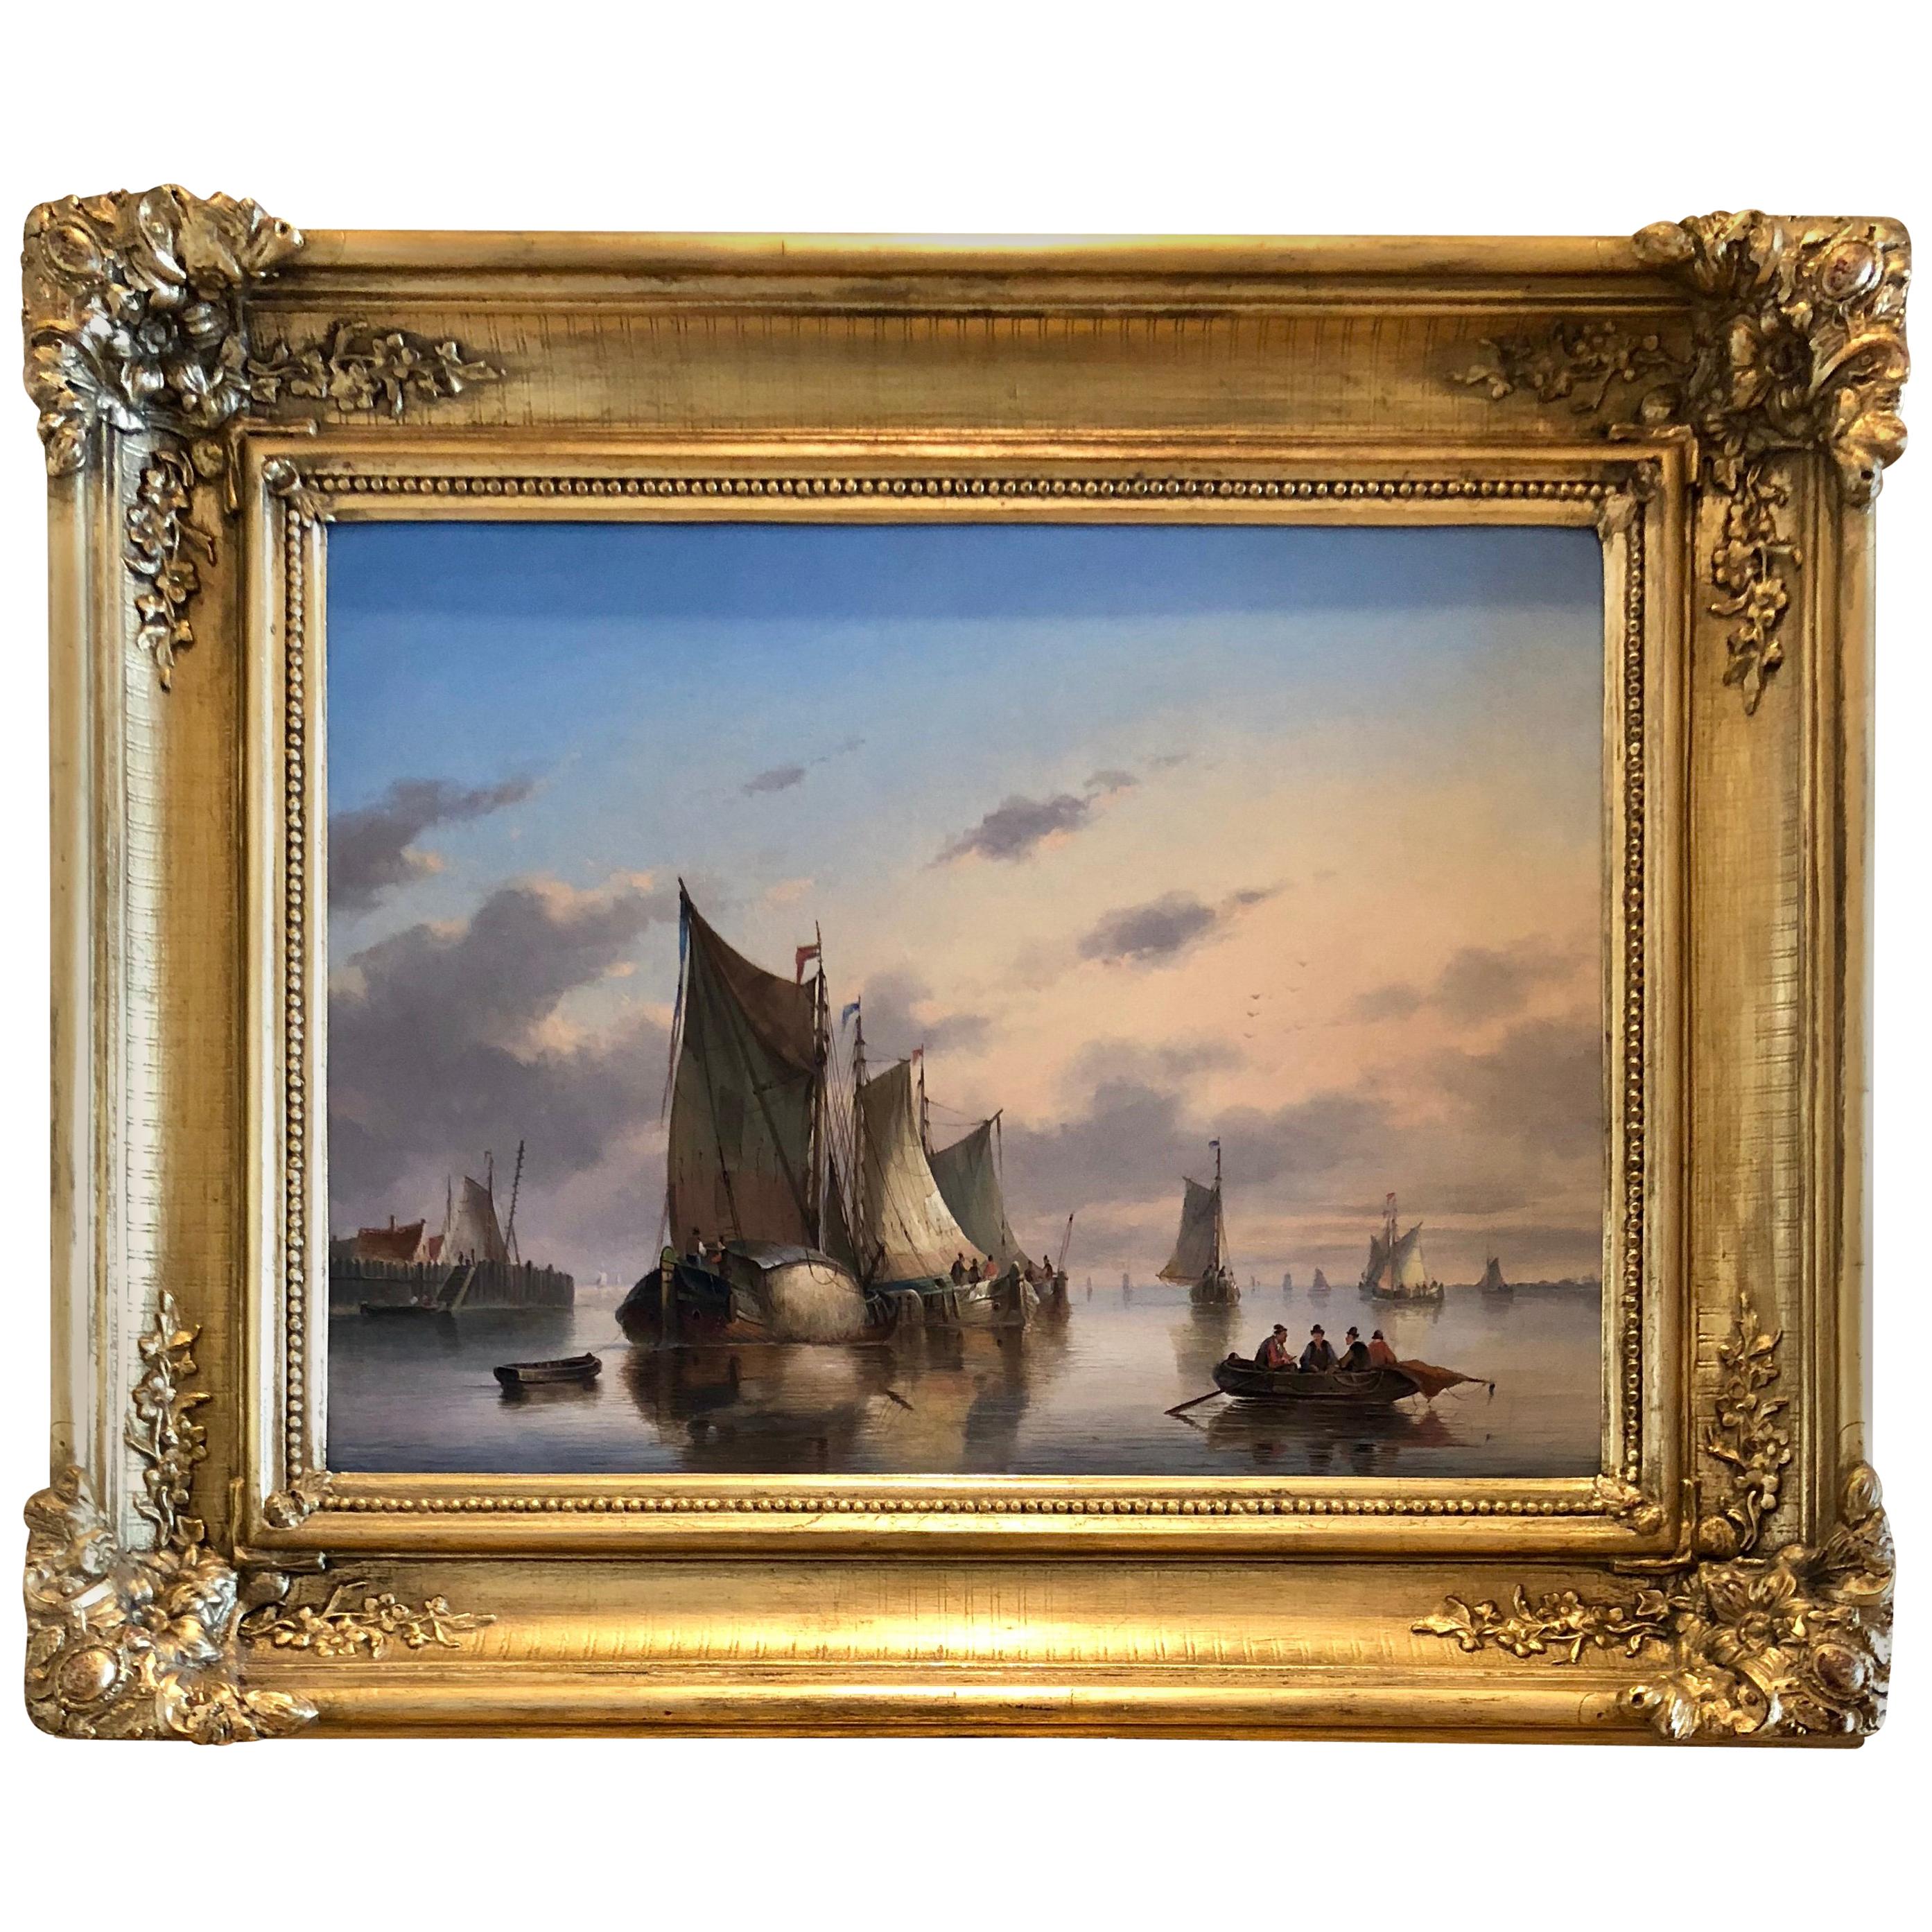 "Hay Barges on Calm Waters" 19th Century Dutch School